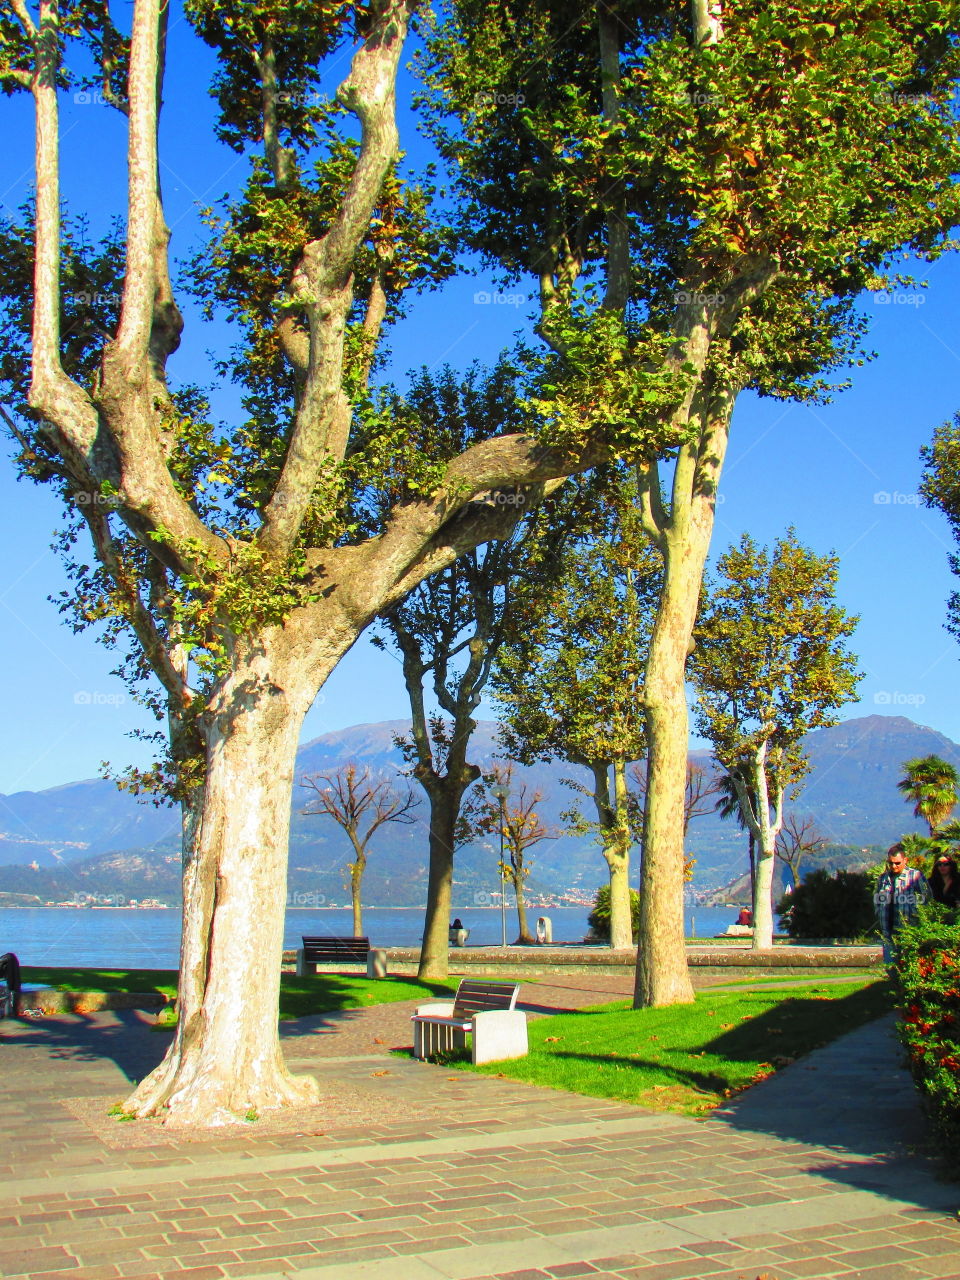 This walk along the lake under the trees represent the quiet and the atmosphere of this land in Italy